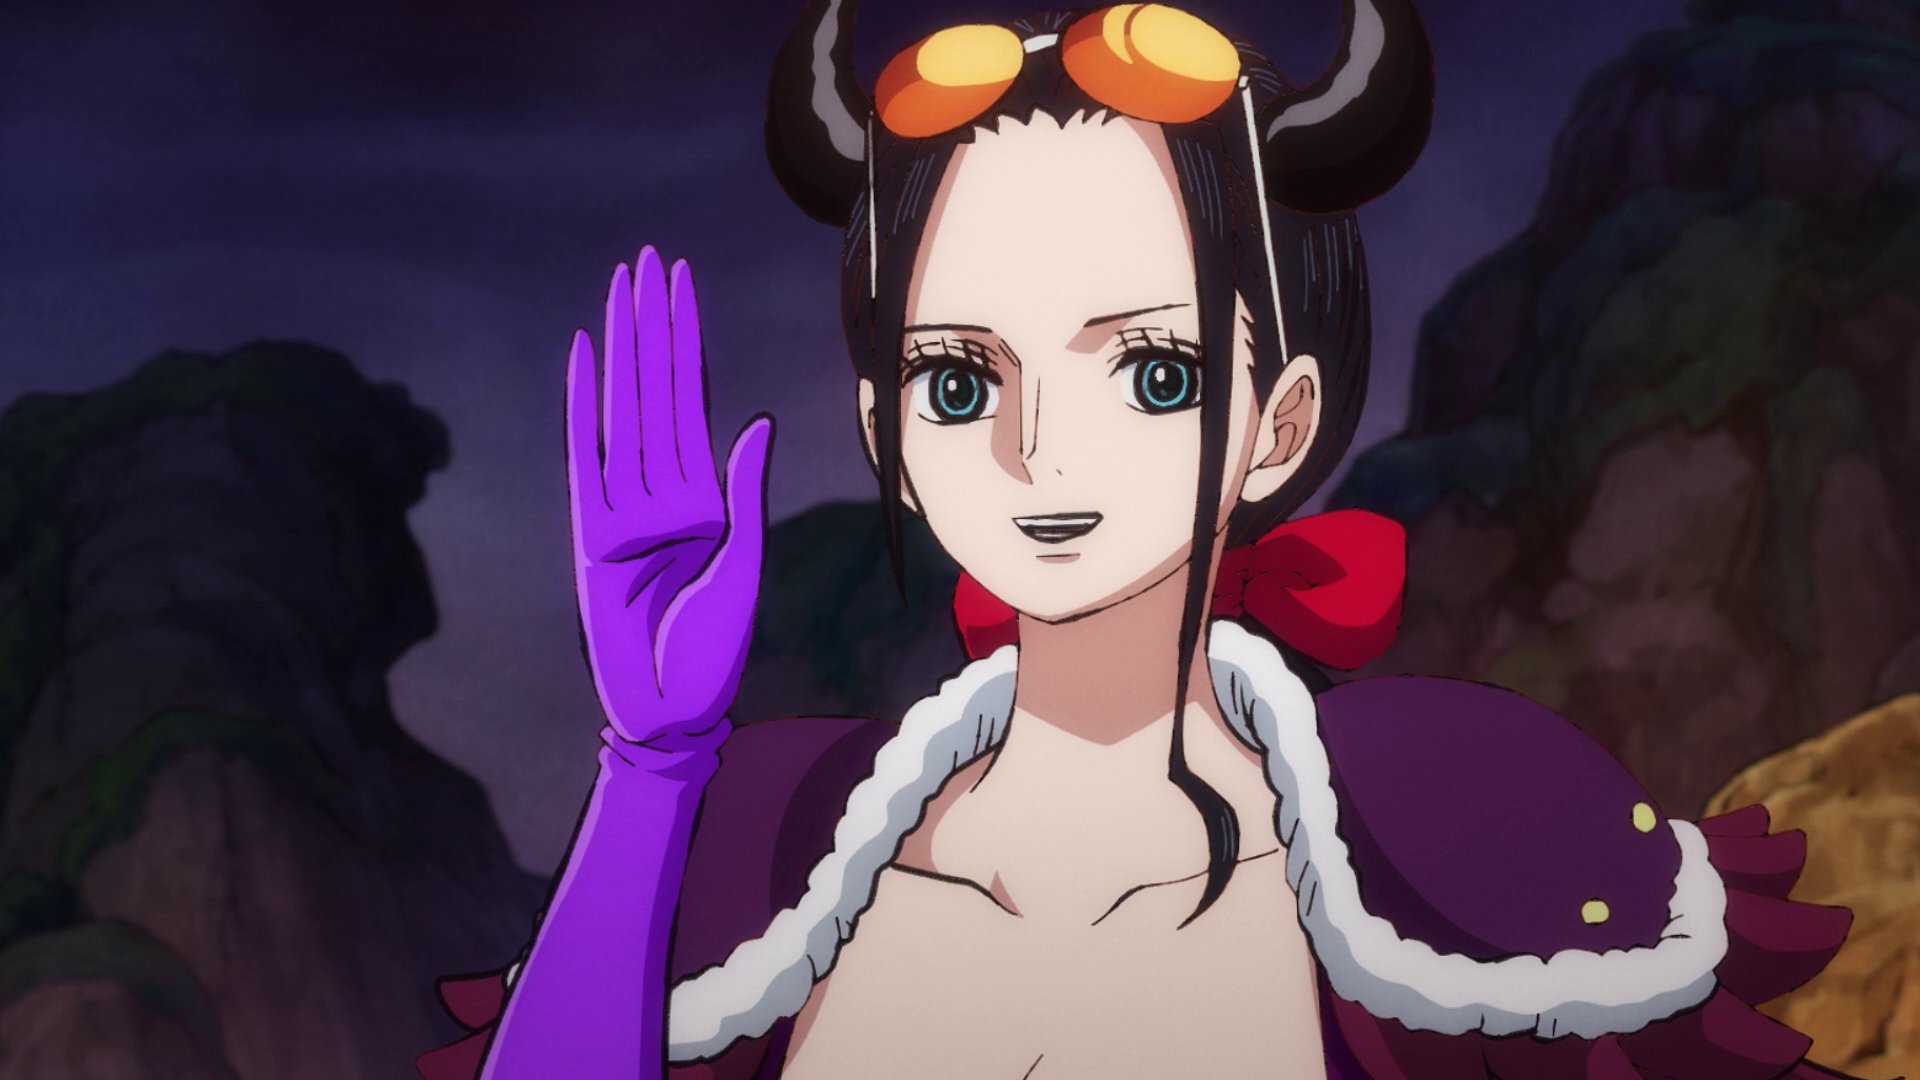 Rsa Nico Robin In Her Beasts Pirates Outfit Onepiece Episode 984 T Co Sgjxnujuke Twitter